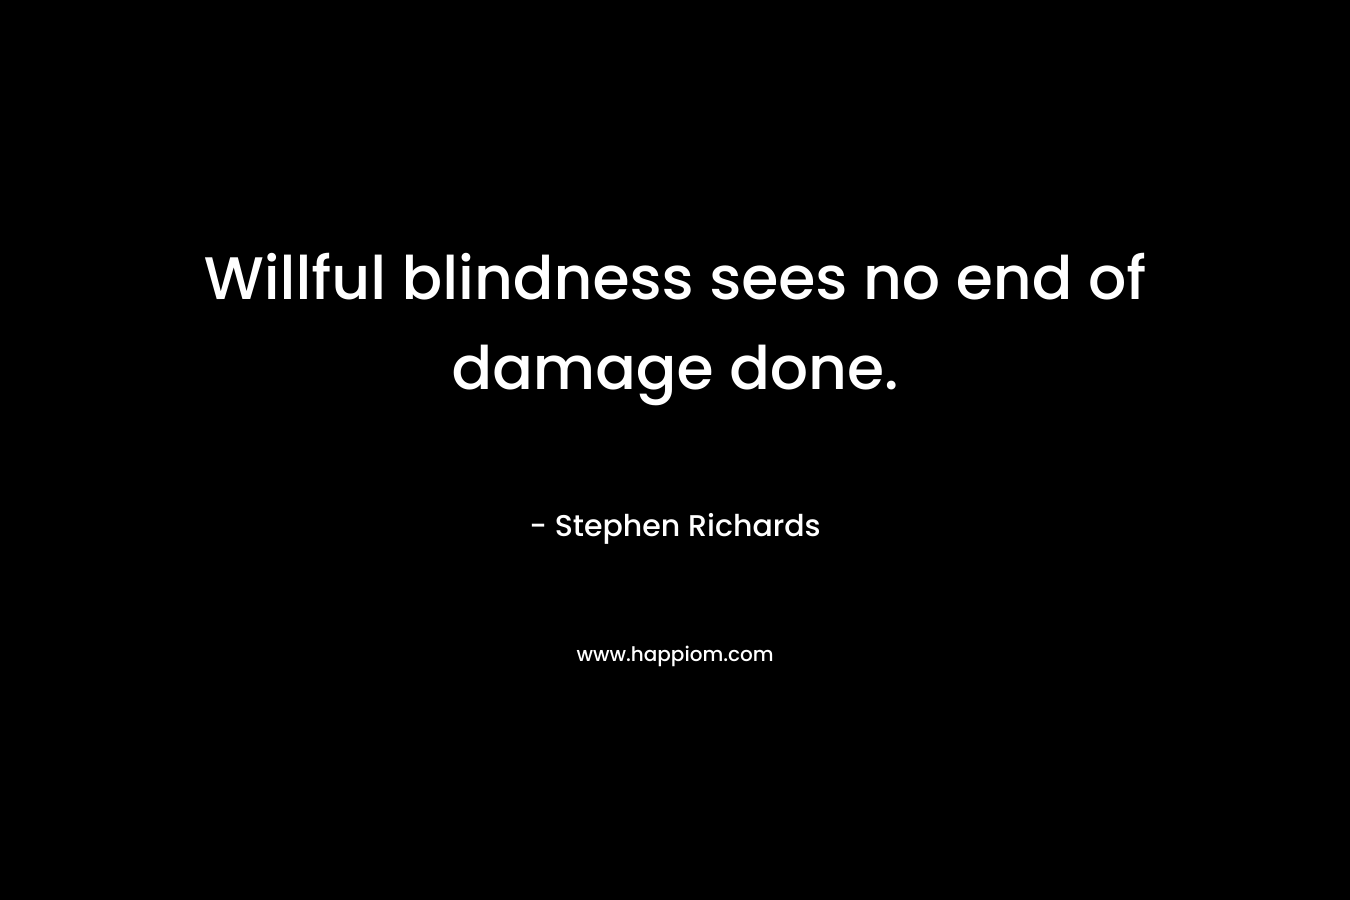 Willful blindness sees no end of damage done. – Stephen Richards